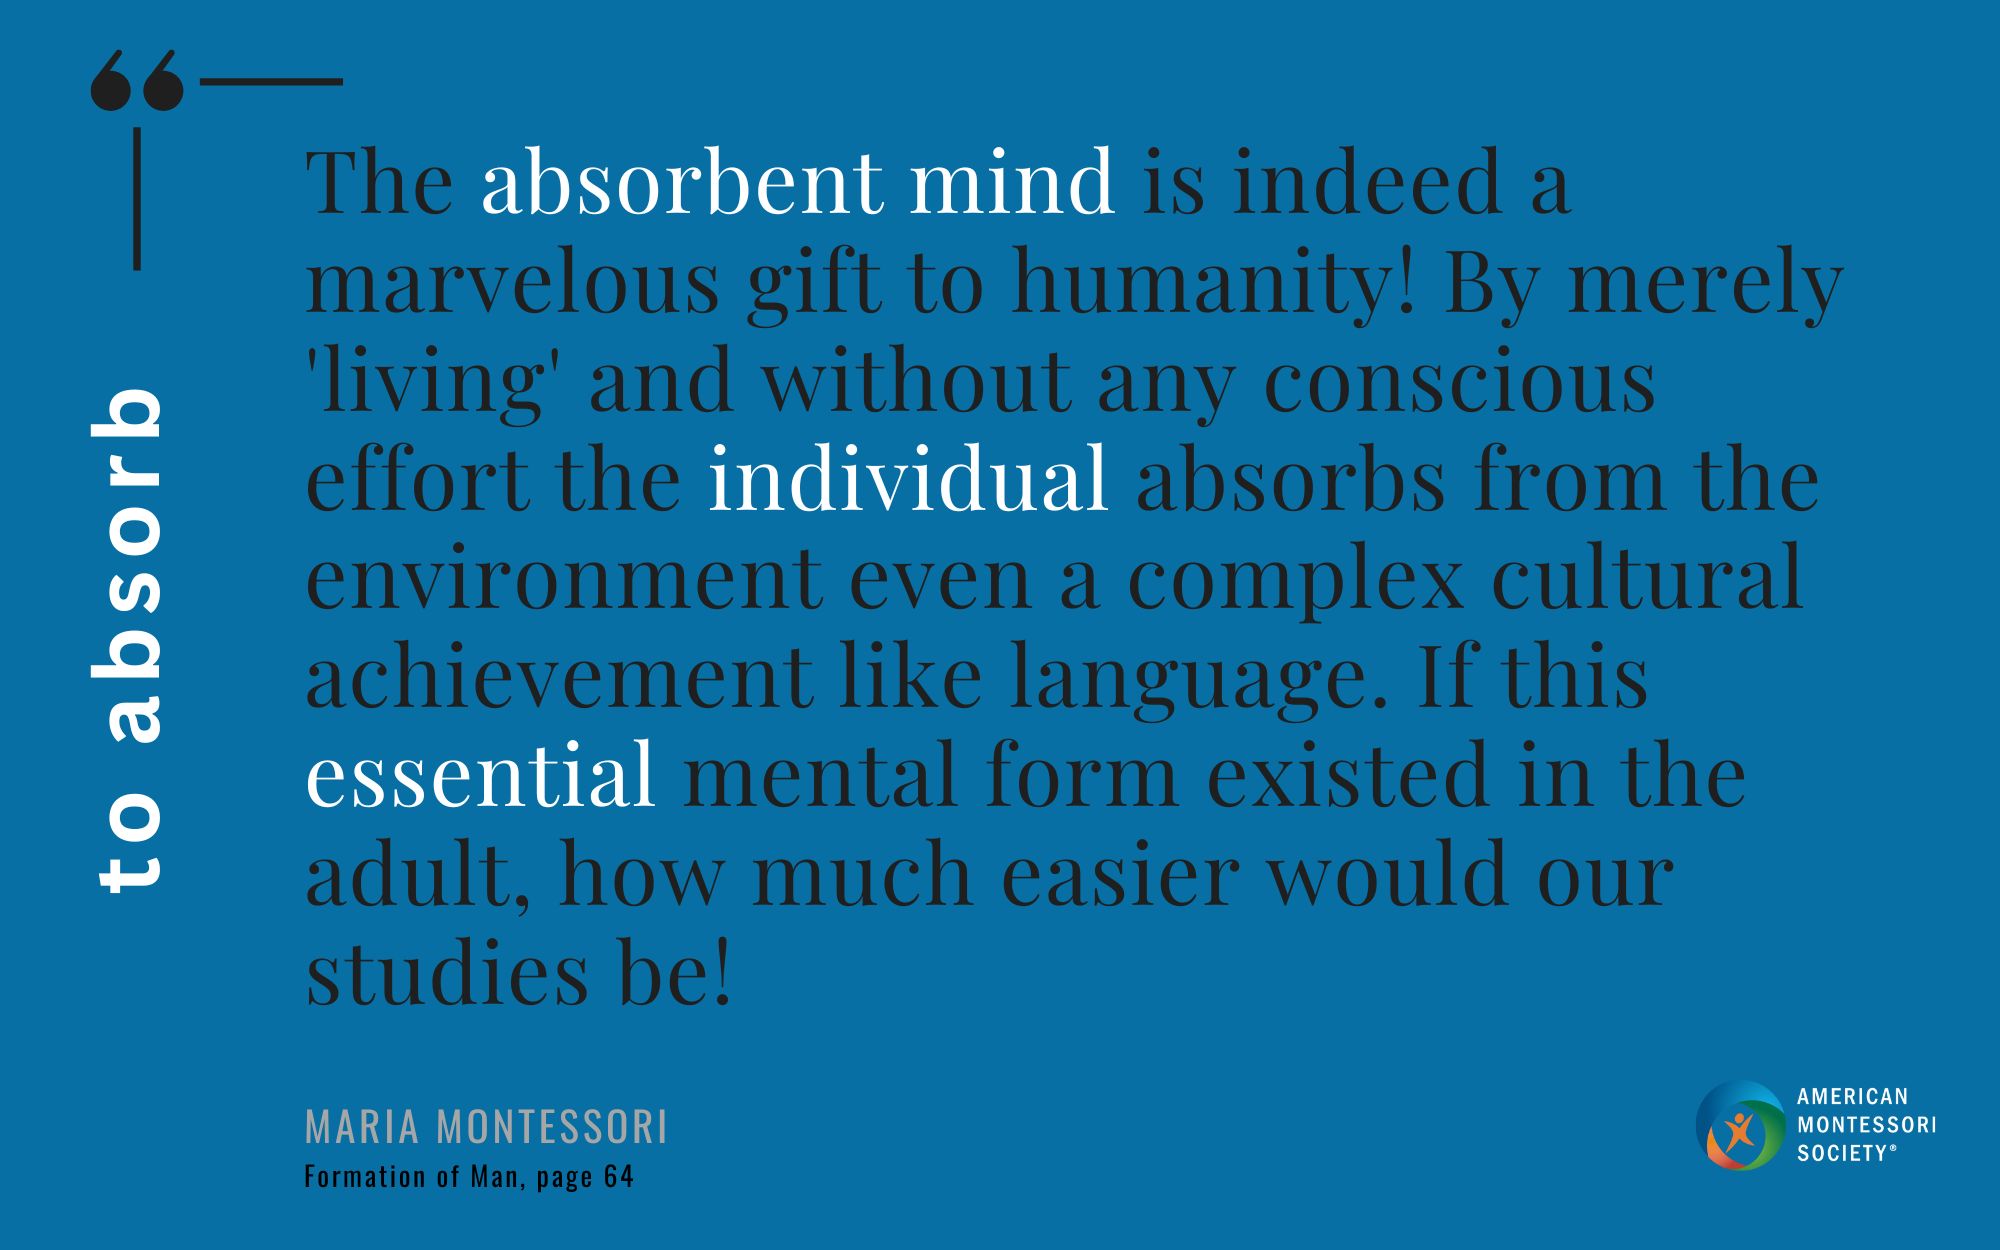 The absorbent mind is indeed a marvelous gift to humanity! By merely 'living' and without any conscious effort the individual absorbs from the environment even a complex cultural achievement like language. If this essential mental form existed in the adult, how much easier would our studies be!